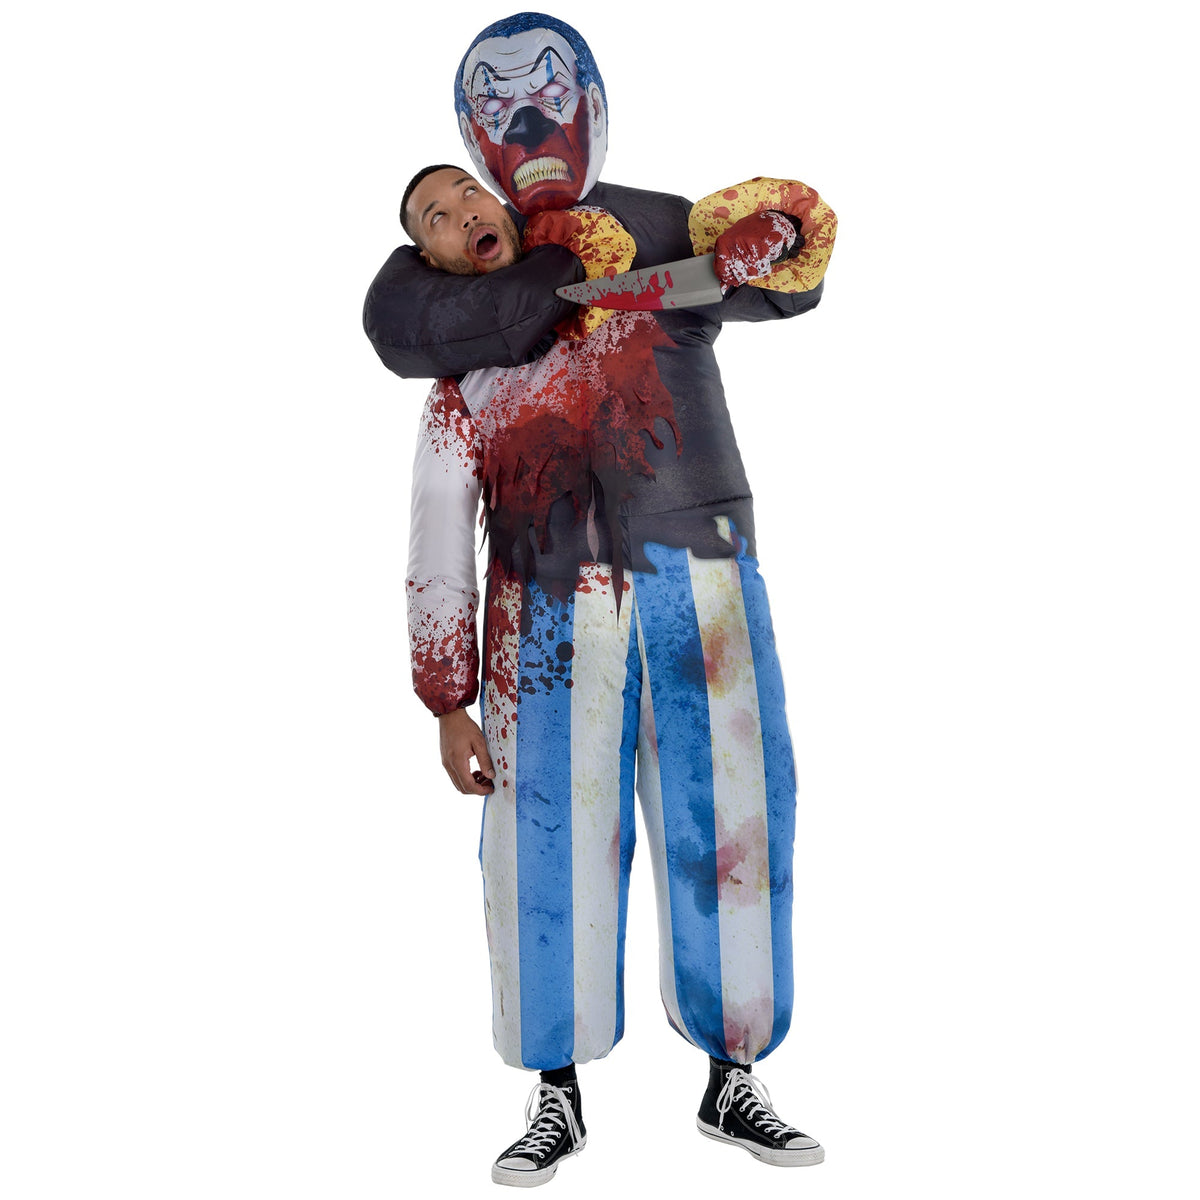 HALLOWEEN COSTUME CO. Costumes Killer Clown Capture Inflatable Costume for Adults 192937454374